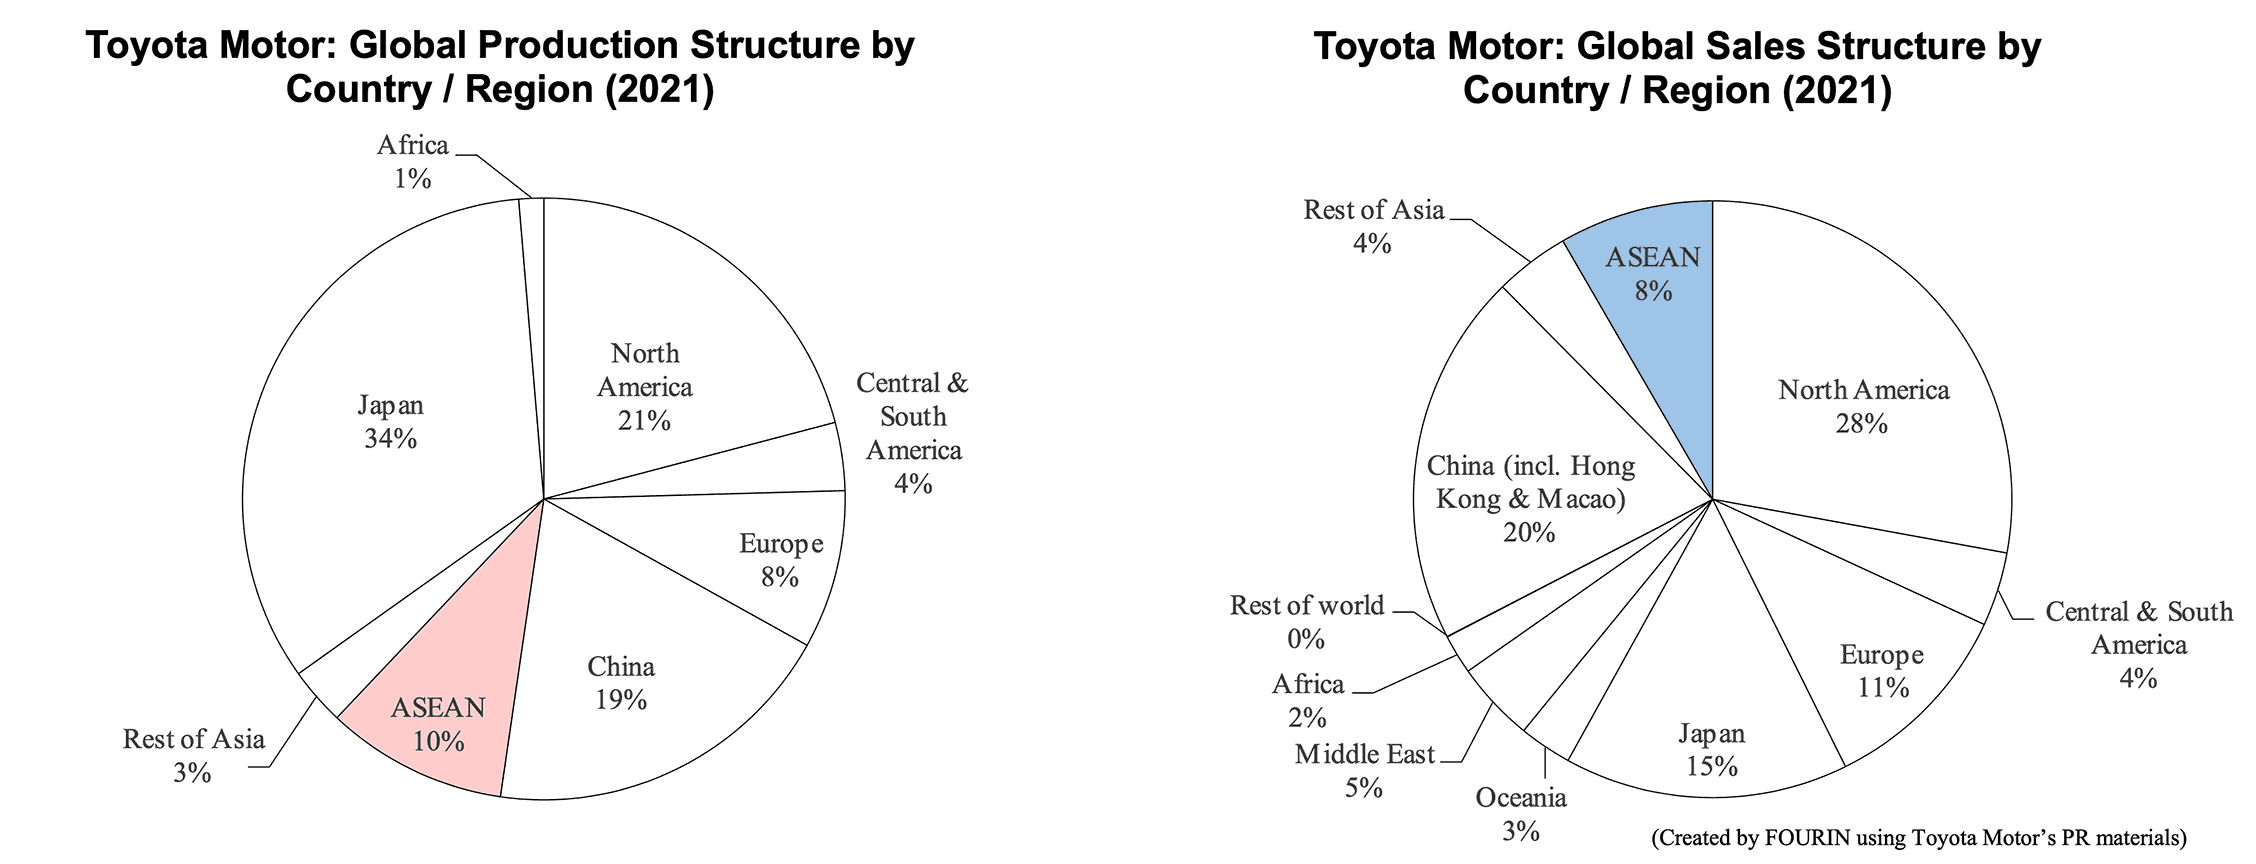 Toyota Motor: Global Production & Sales Structures by Country / Region (2021)